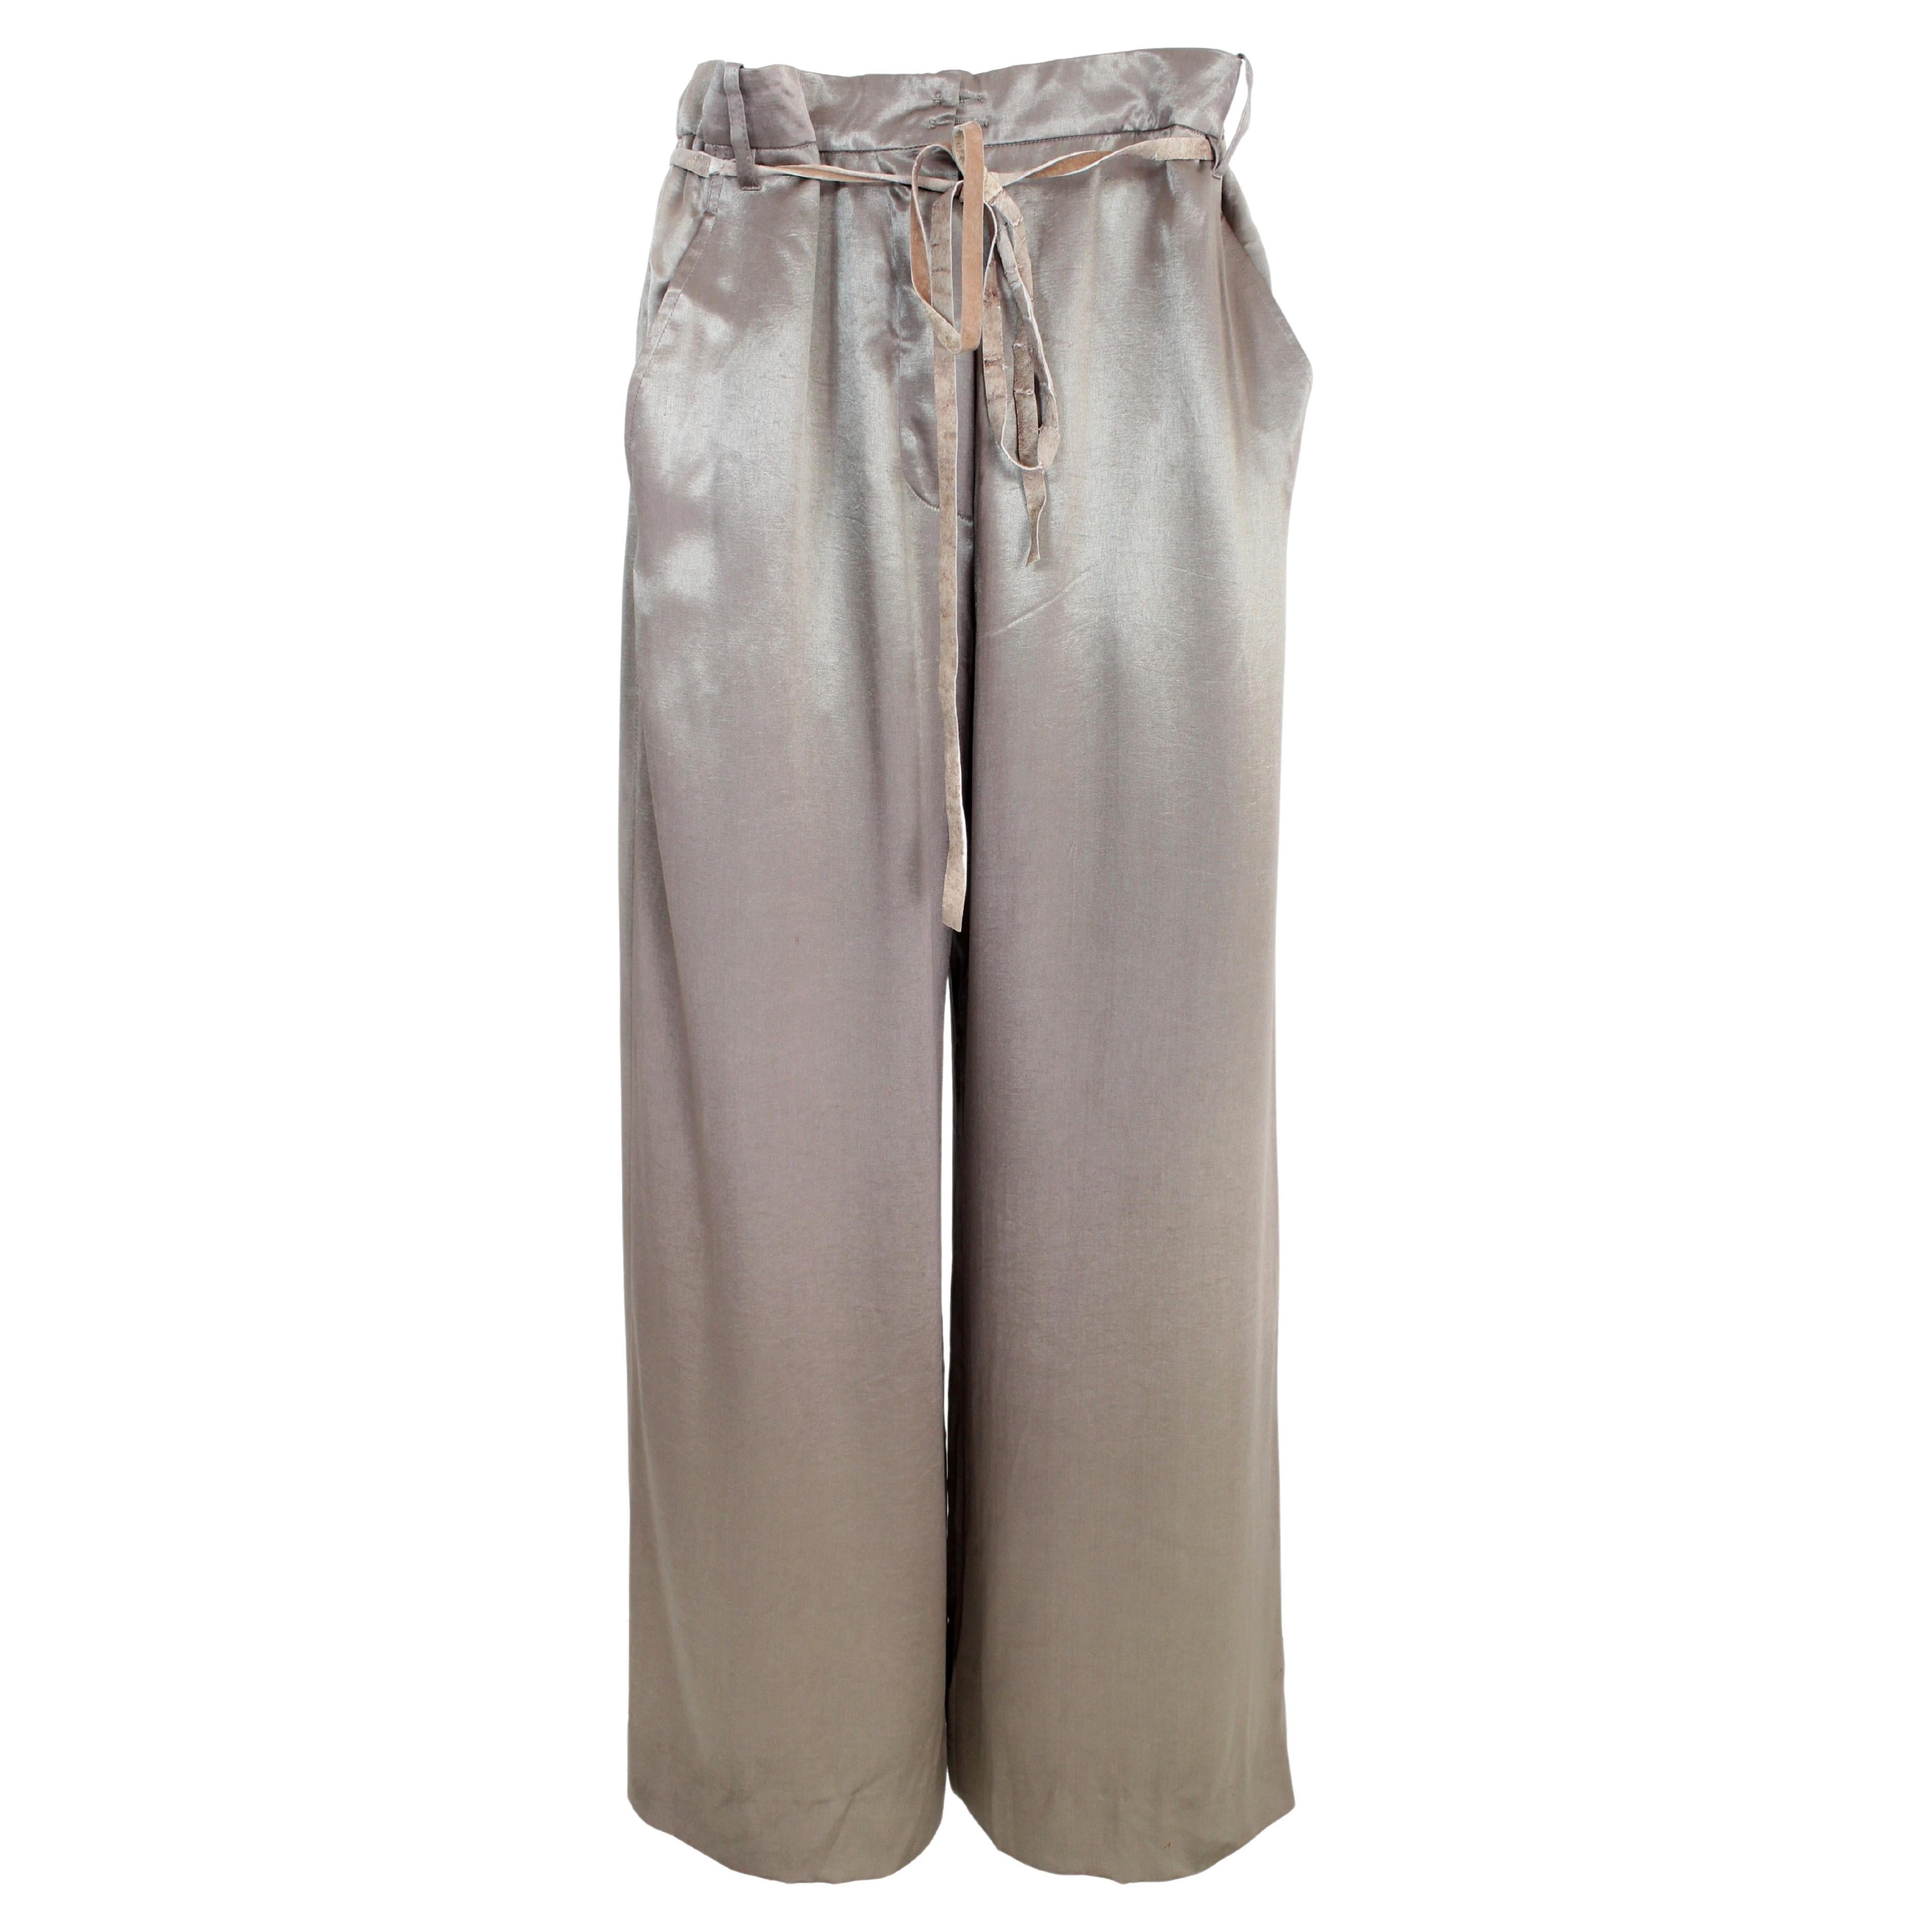 Ann Demeulemeester Taupe Palazzo Trousers